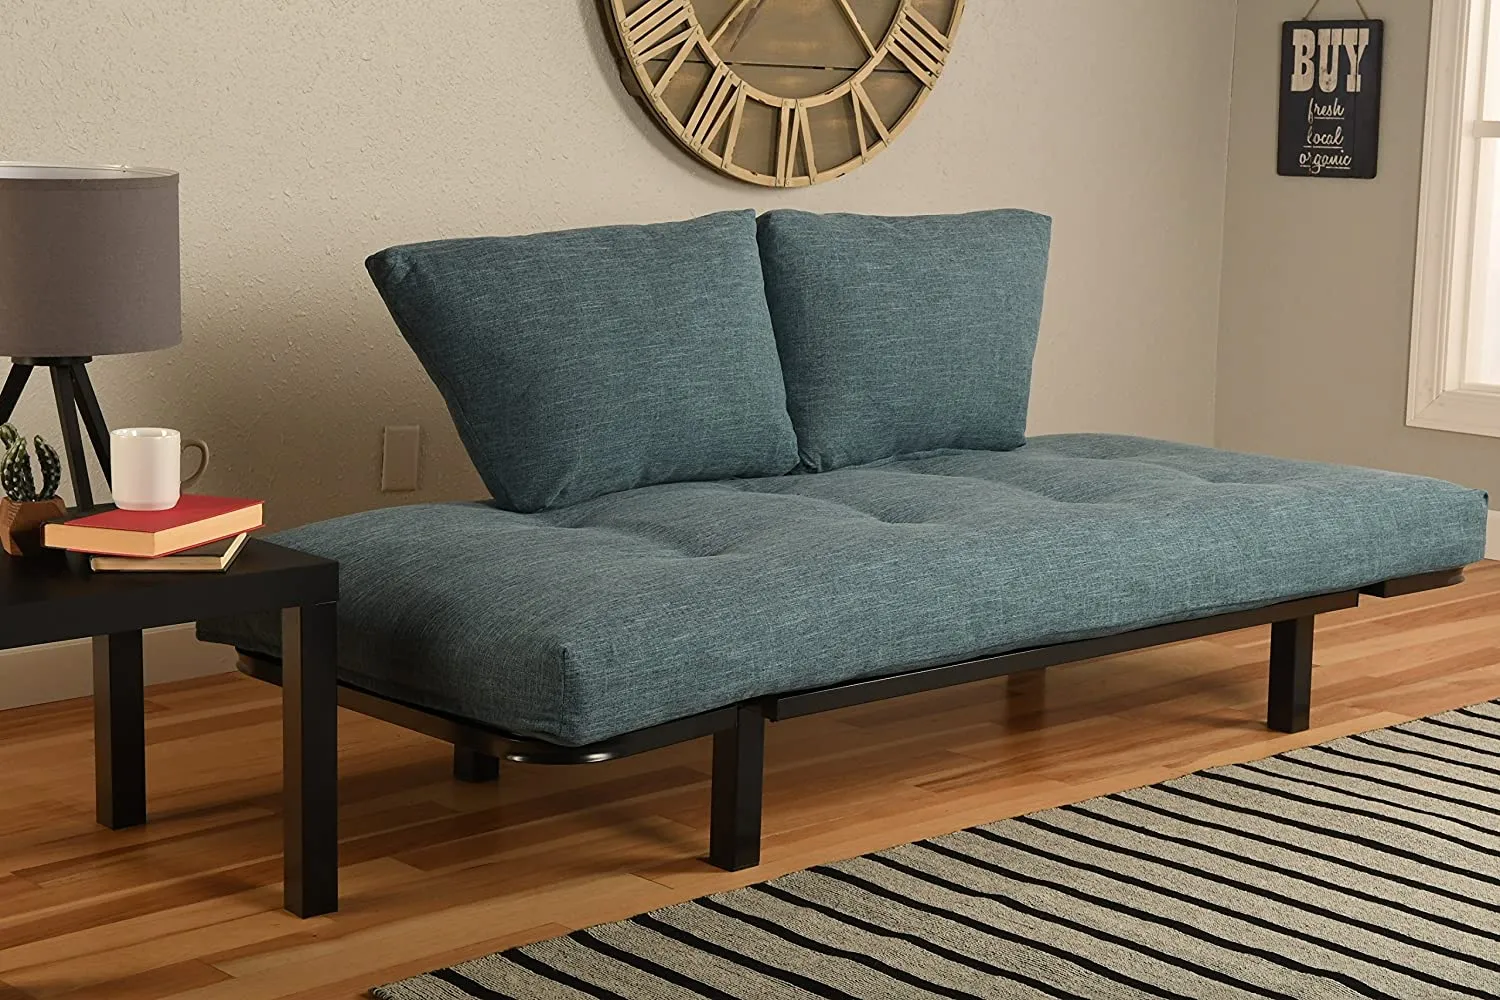 minimal living room decor, carpet, blue couch, metal furniture, wall art, table lamp beside the couch